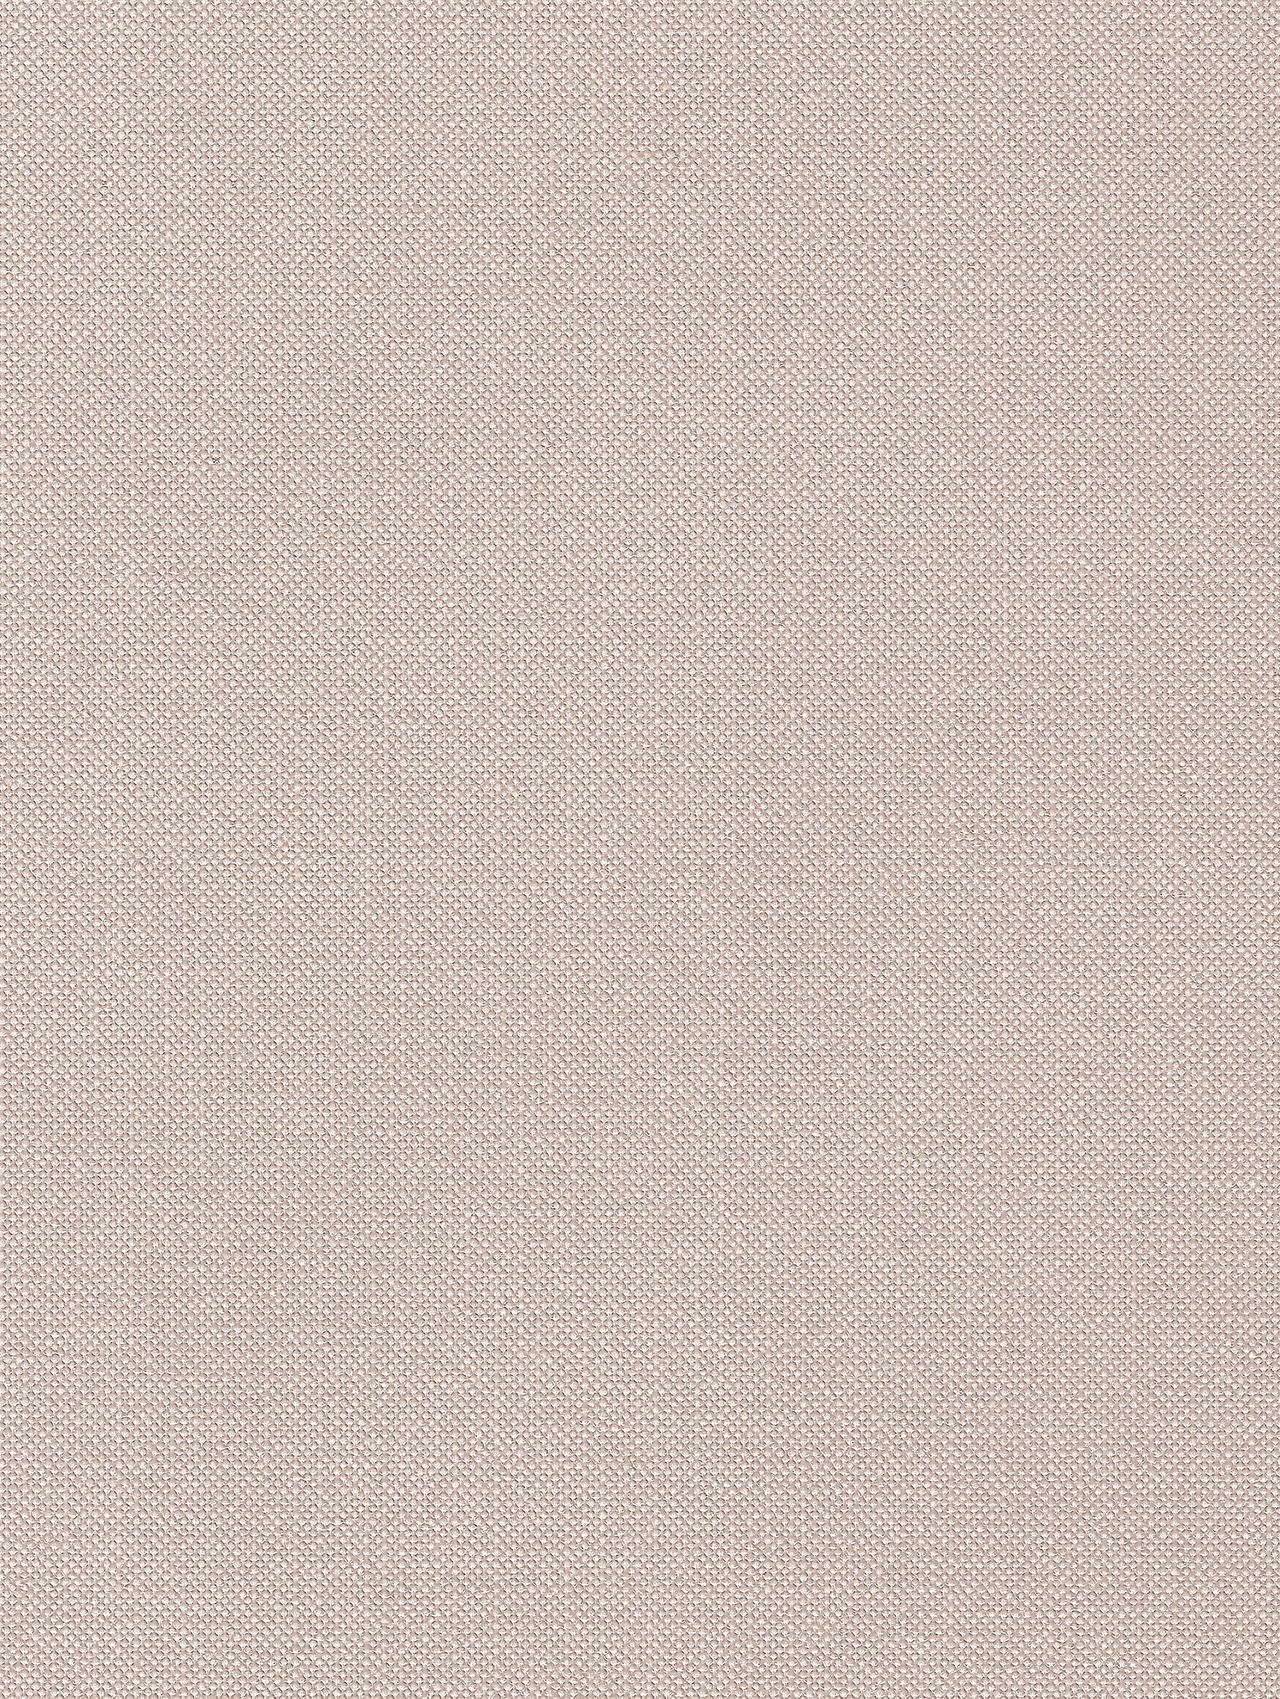 Pearl Canvas Paper Texture